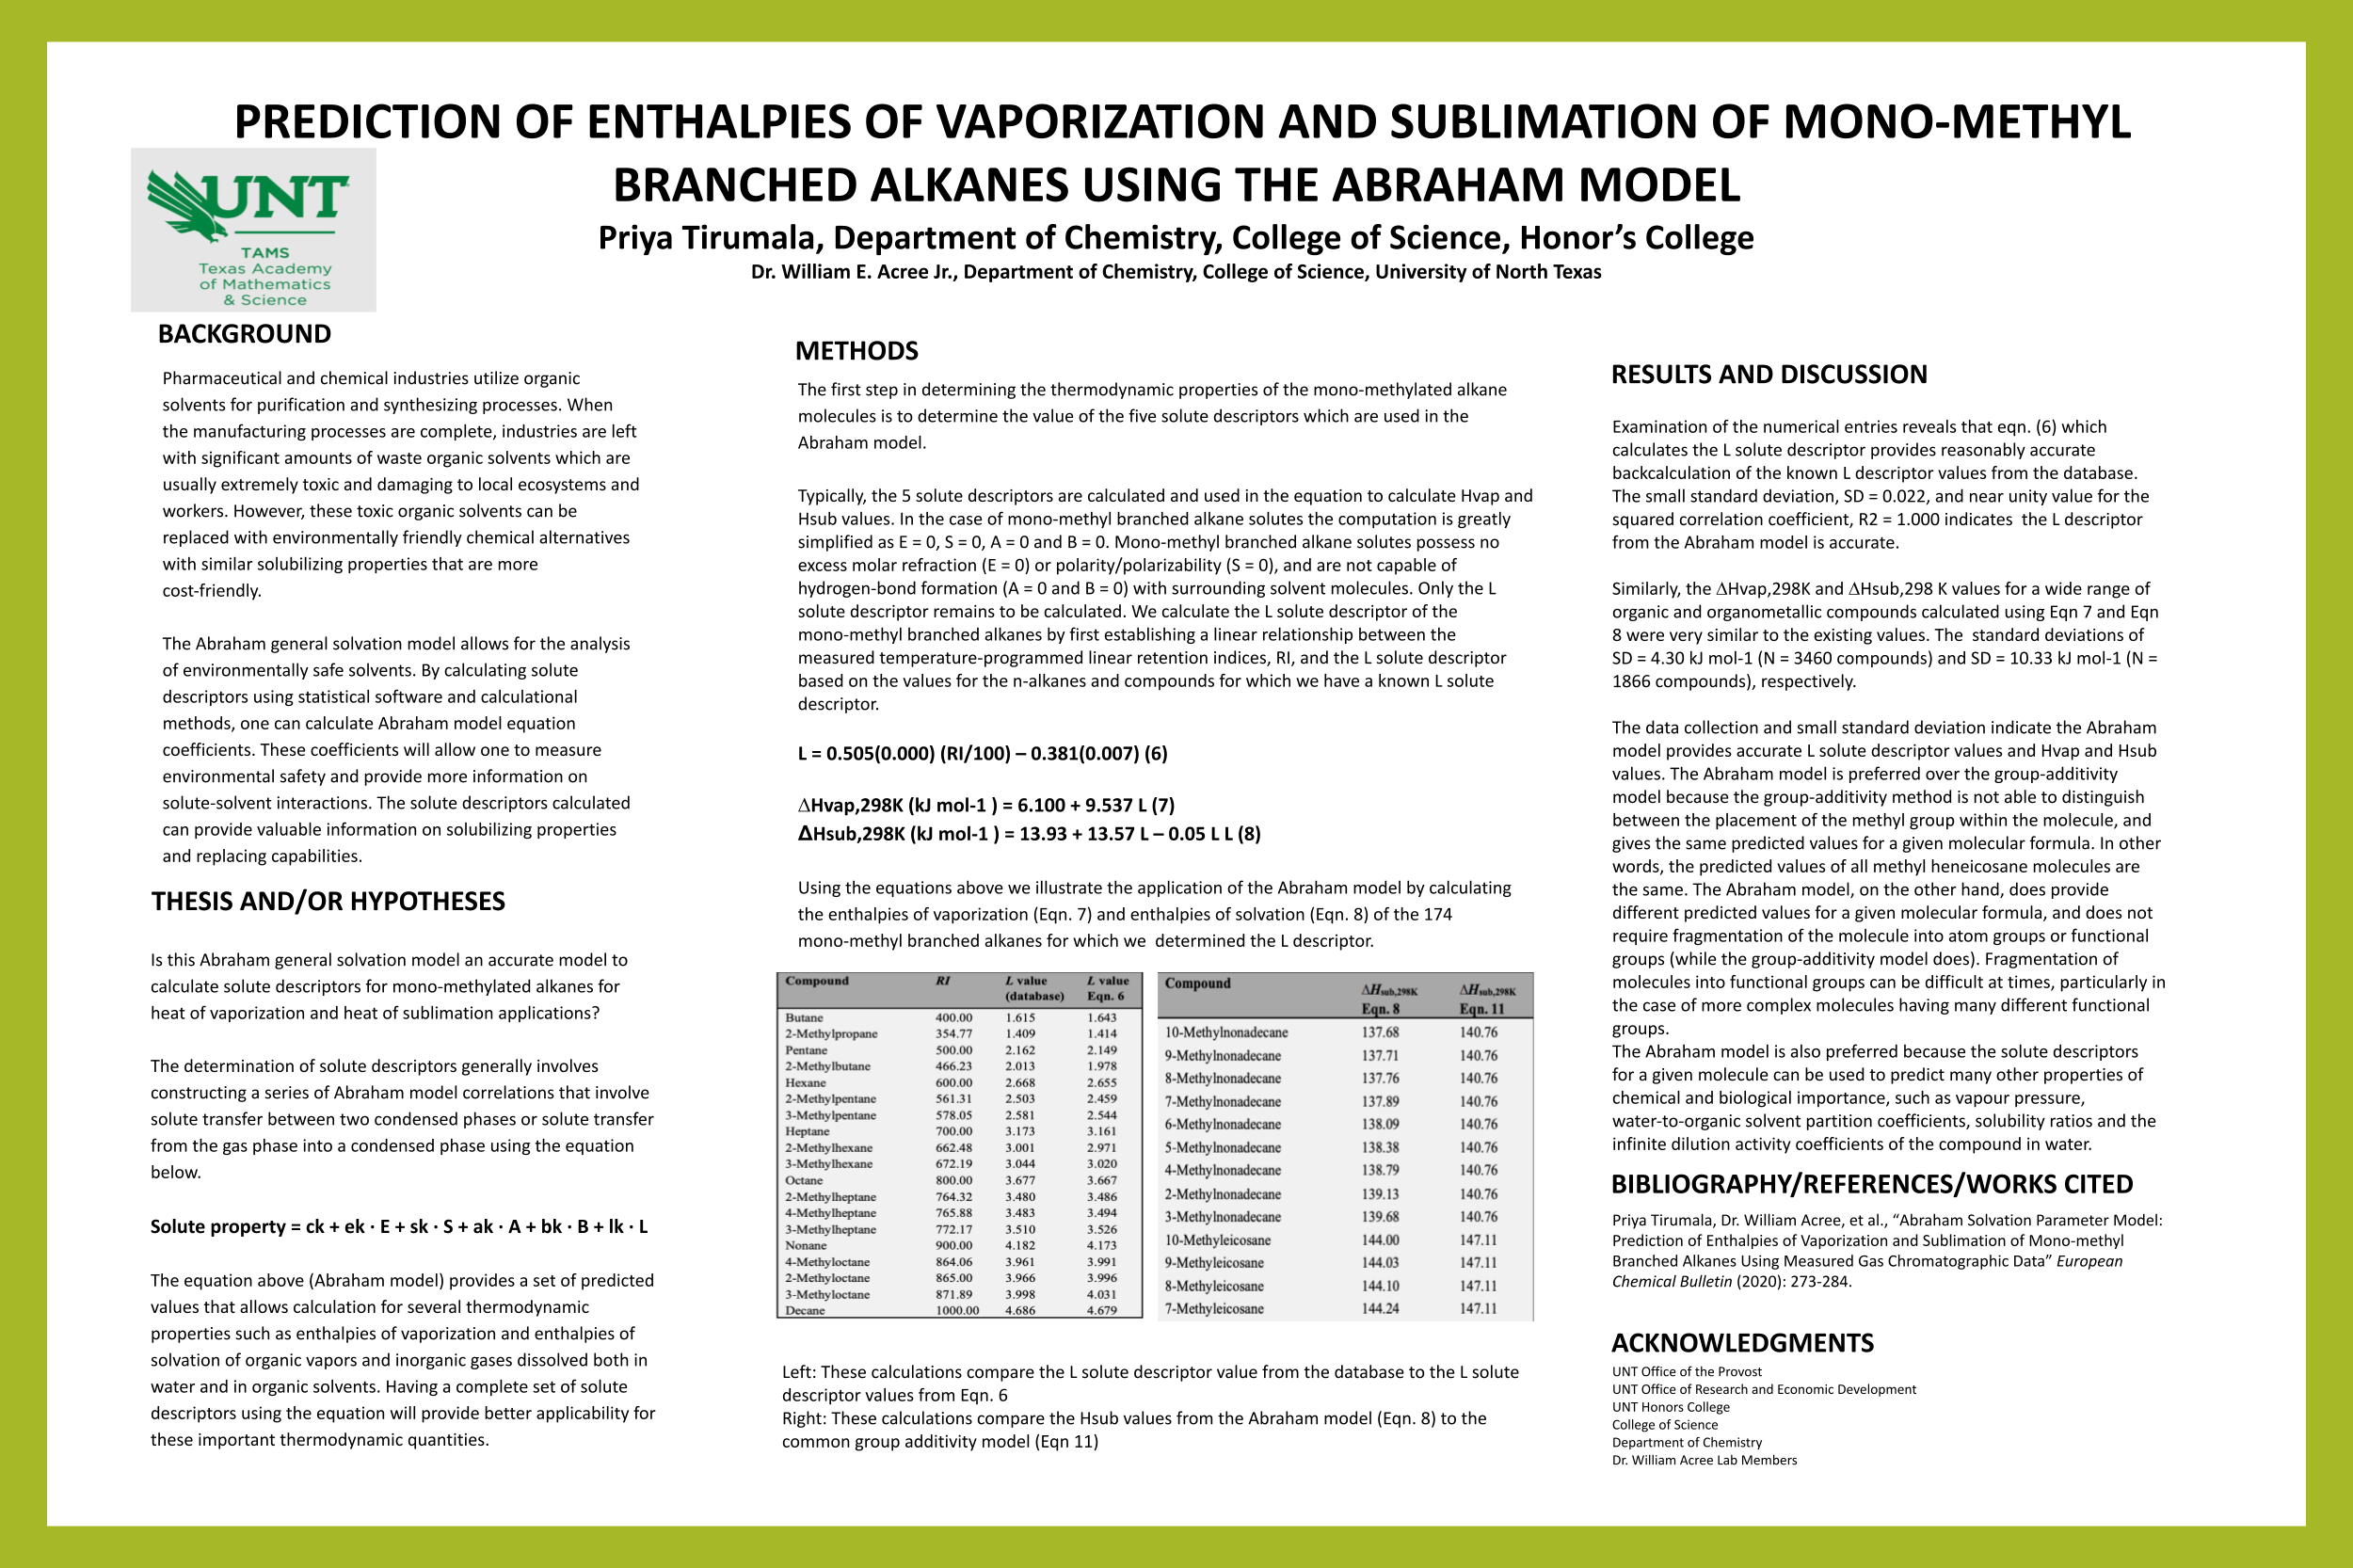 PREDICTION OF ENTHALPIES OF VAPORIZATION AND SUBLIMATION OF MONO-METHYL BRANCHED ALKANES USING THE A